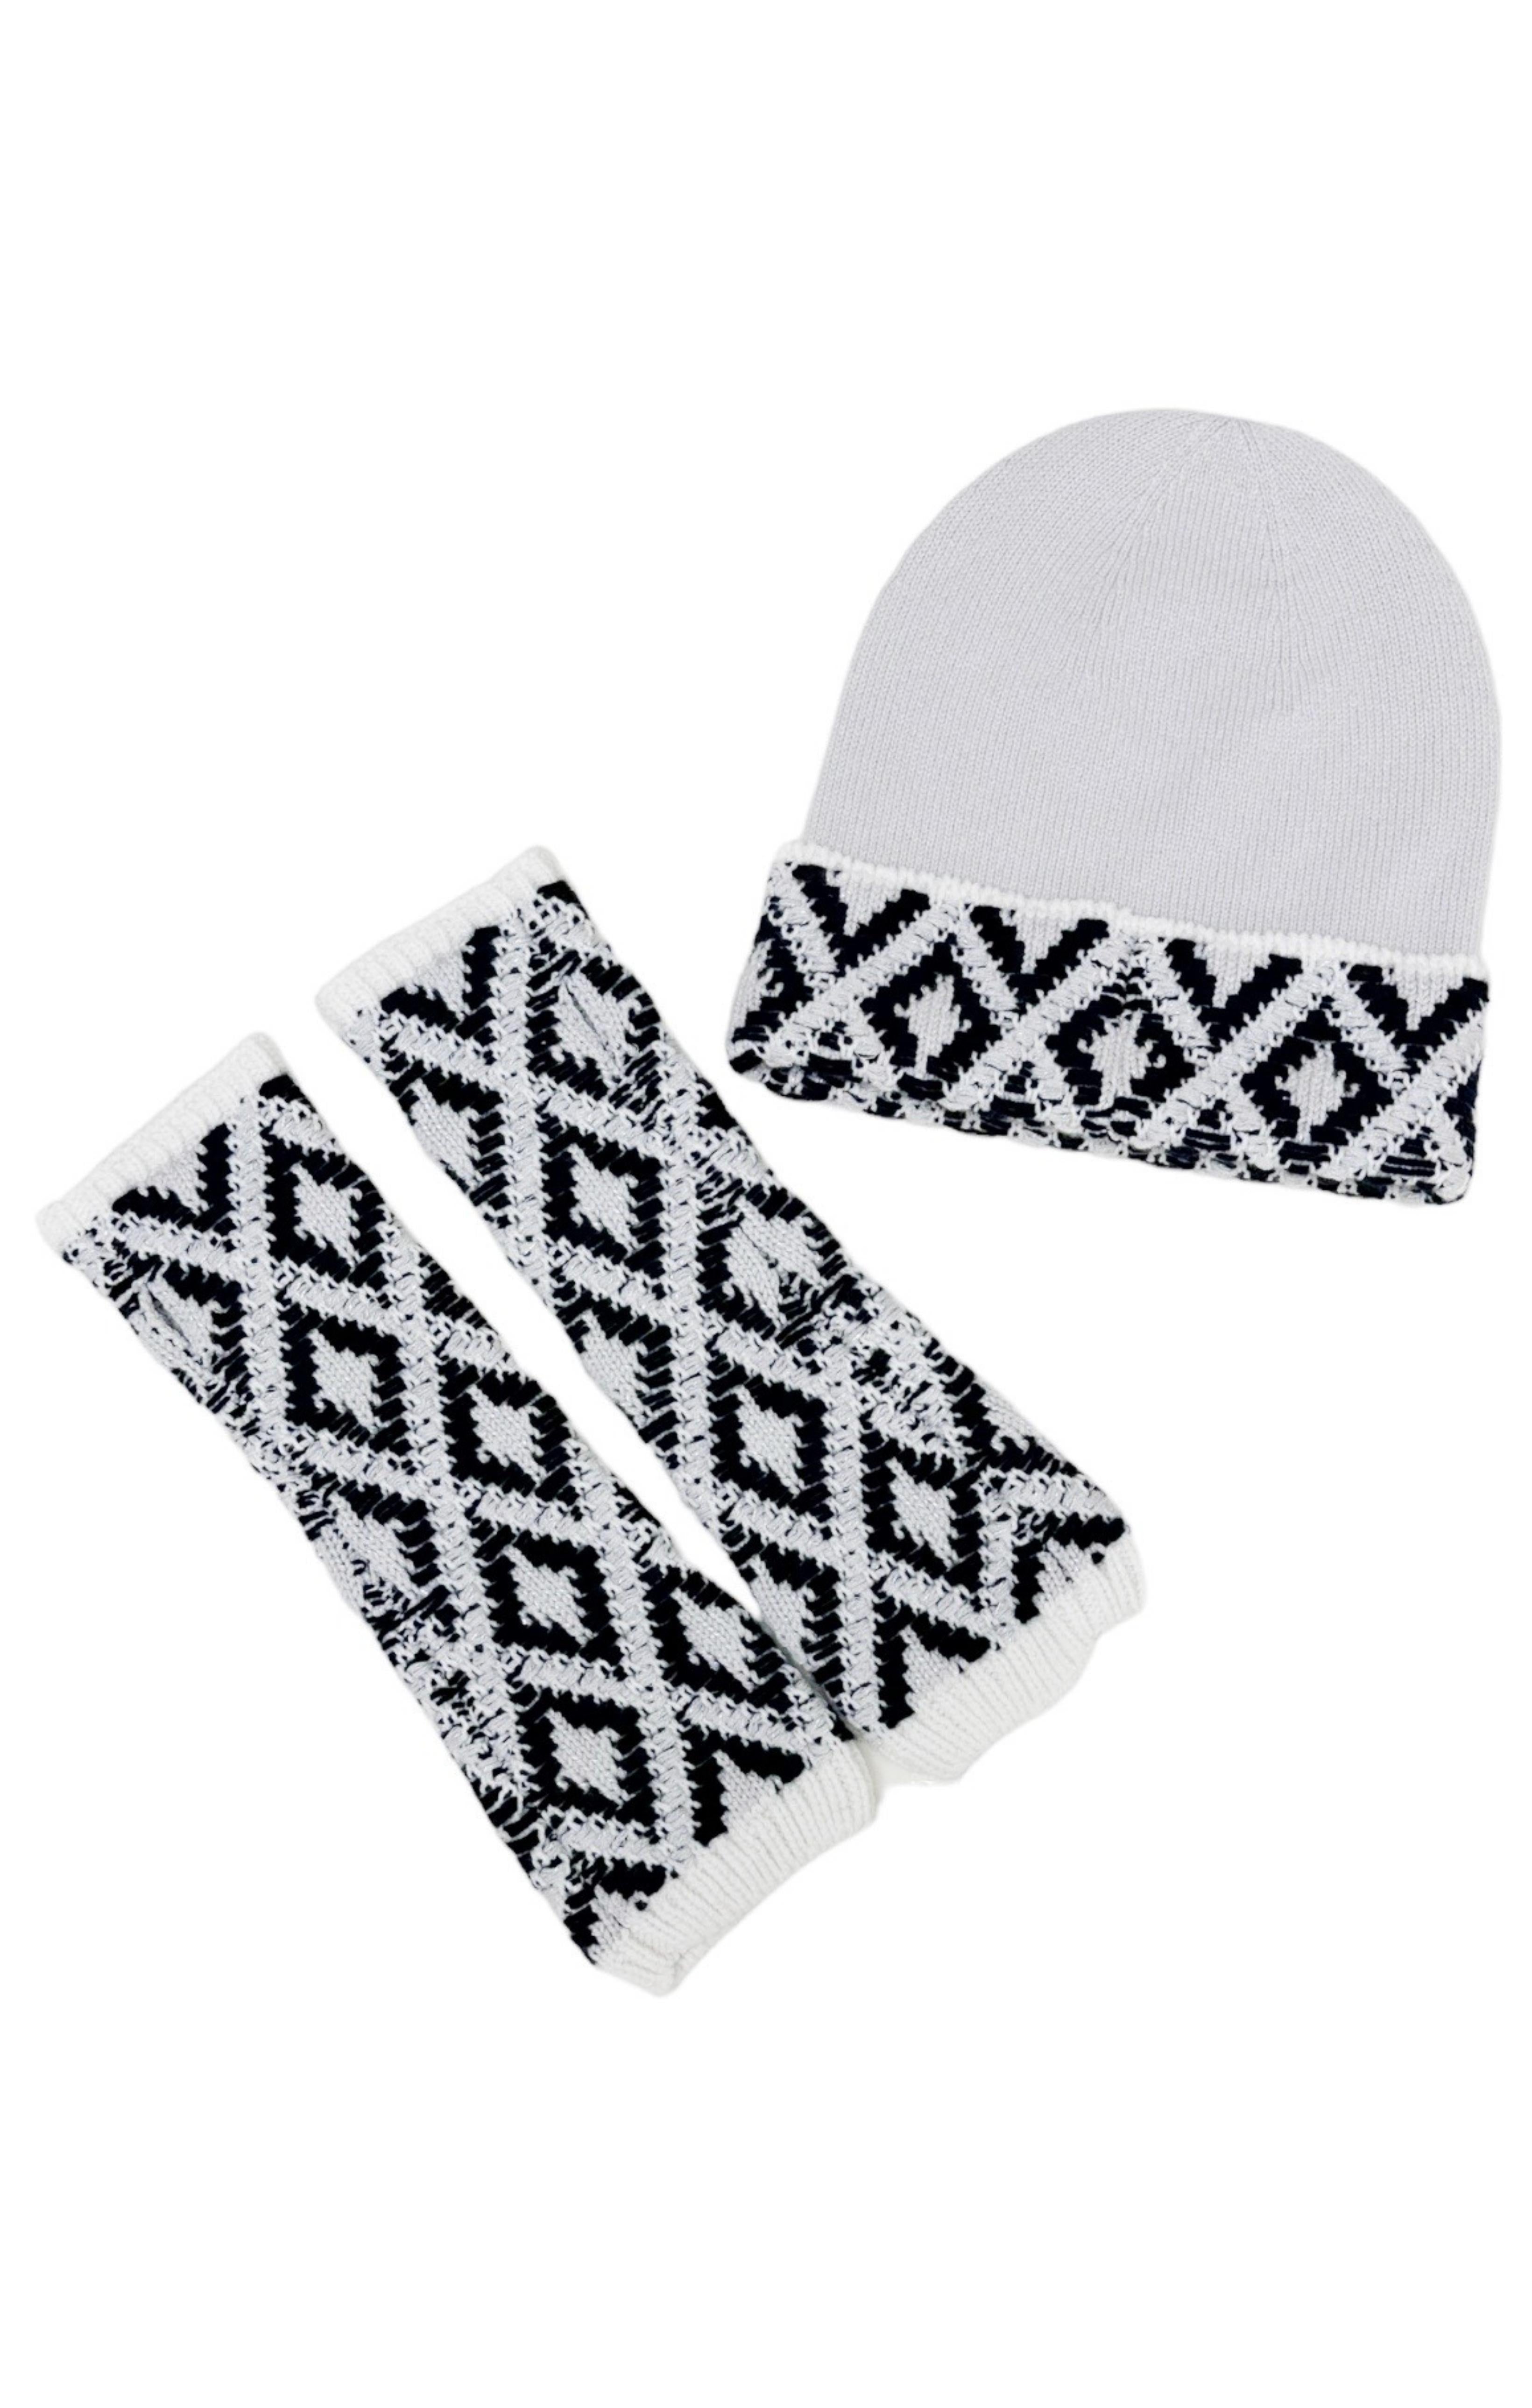 CHANEL (RARE) Hat & Fingerless Gloves Set Size: No size tags, fit like OSFM